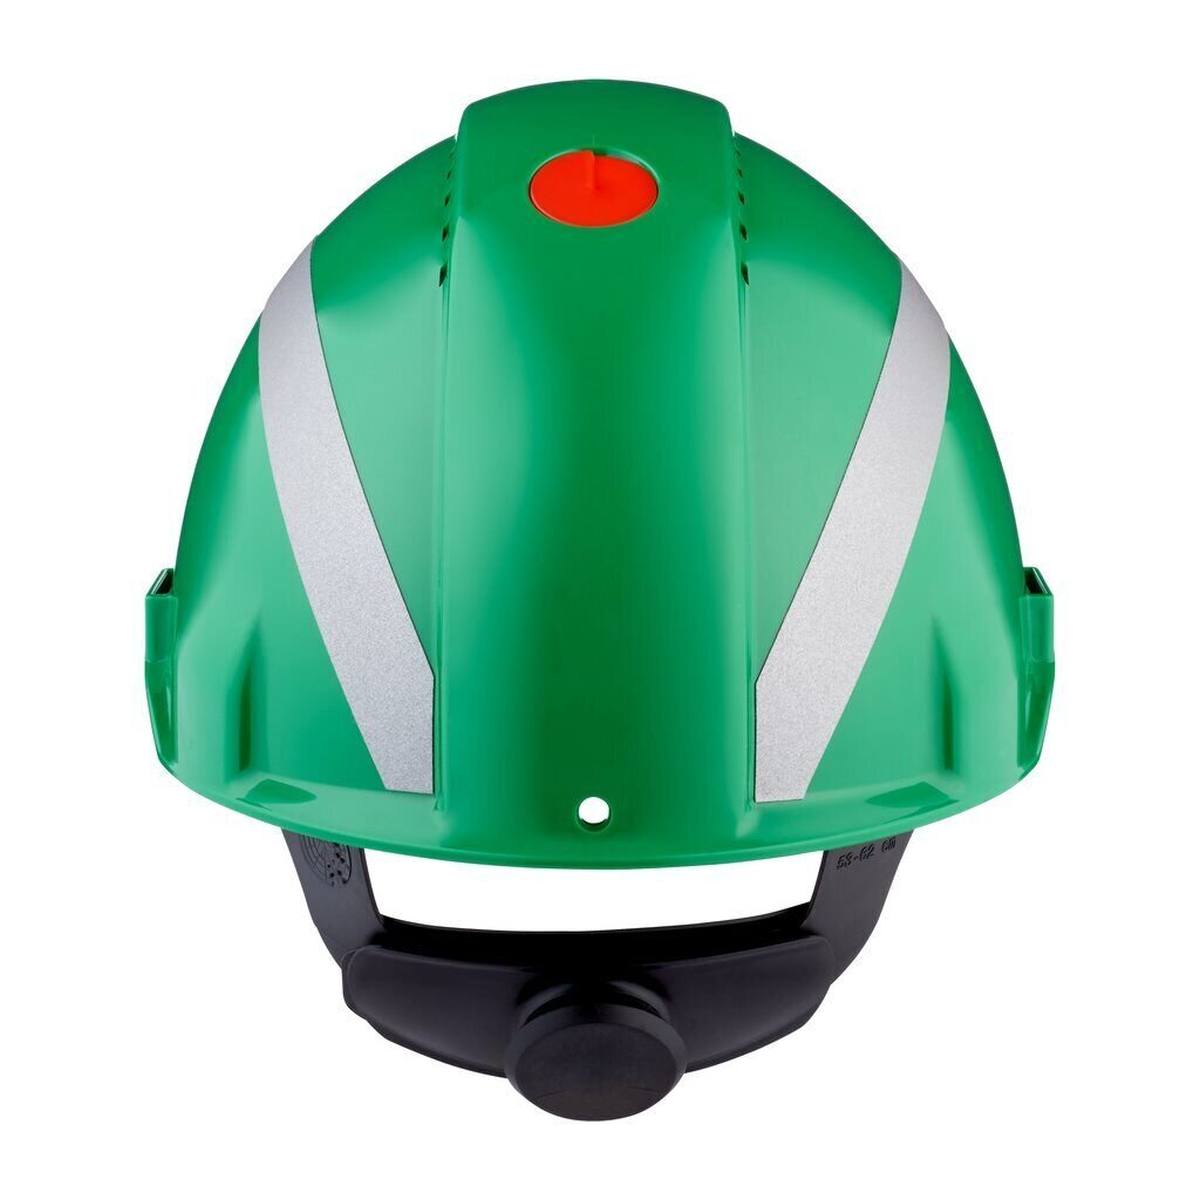 3M G3000 safety helmet with UV indicator, green, ABS, ventilated ratchet fastener, plastic sweatband, reflective sticker